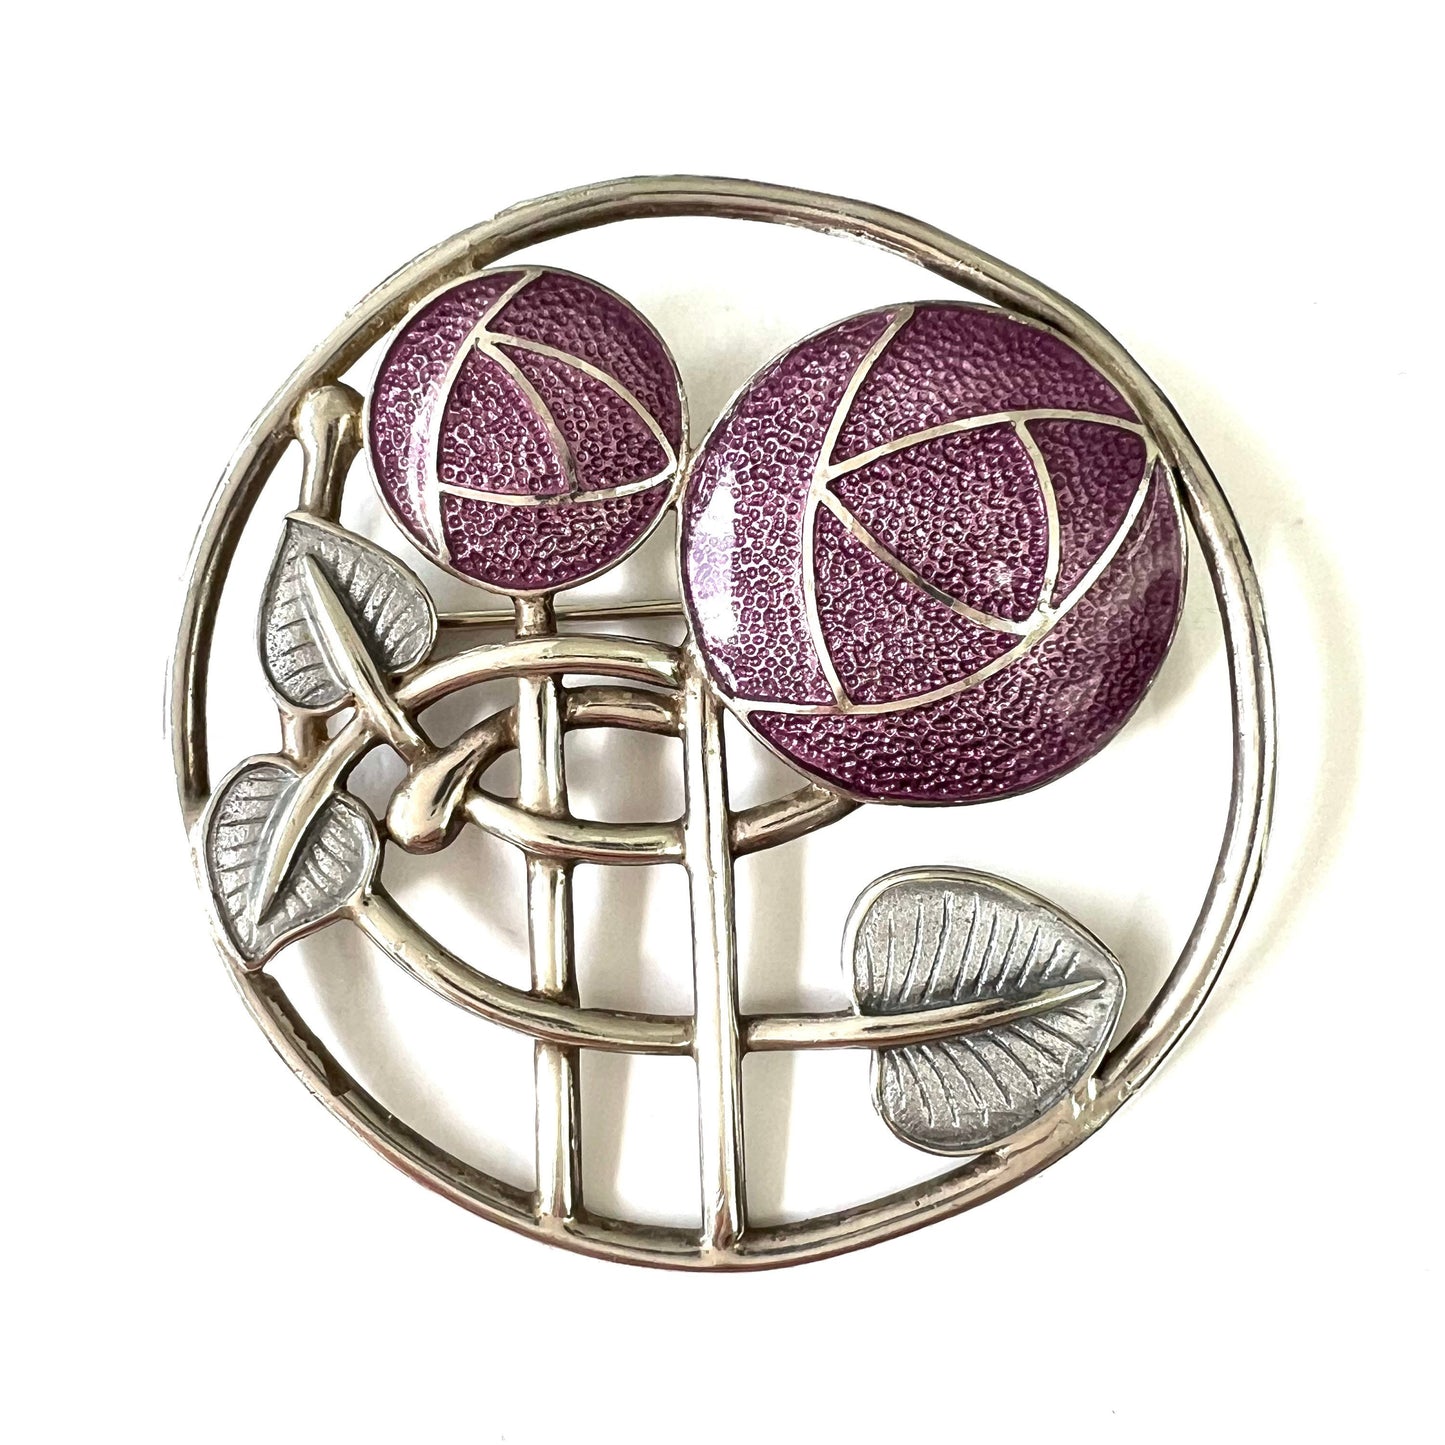 Fish Enterprises 925 Silver Mackintosh Inspired Silver and Purple Enamelled Open Work Brooch (from the year 2000)